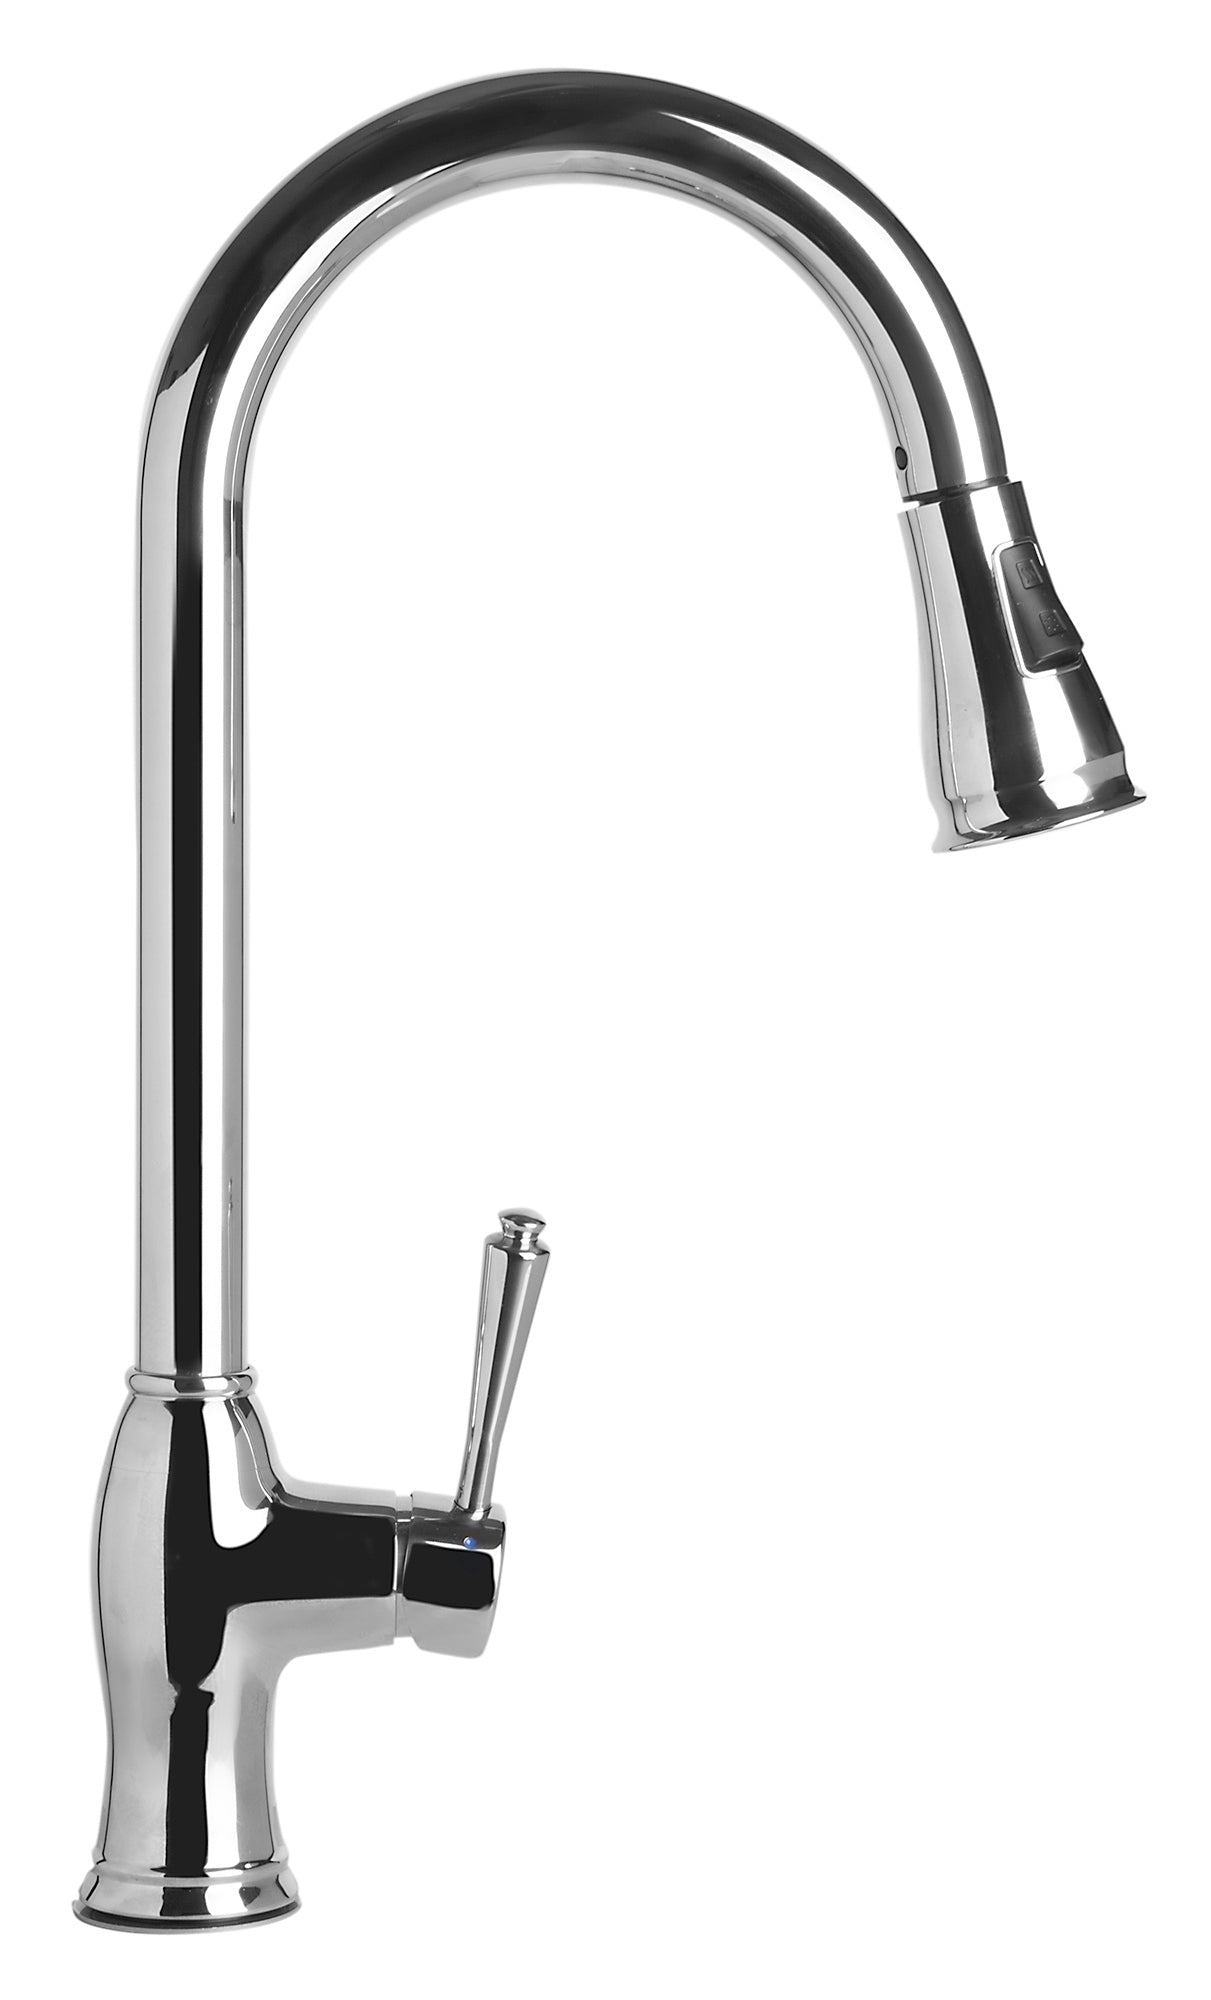 Alfi brand Traditional Solid Brushed Stainless Steel Pull Down Kitchen Faucet AB2043